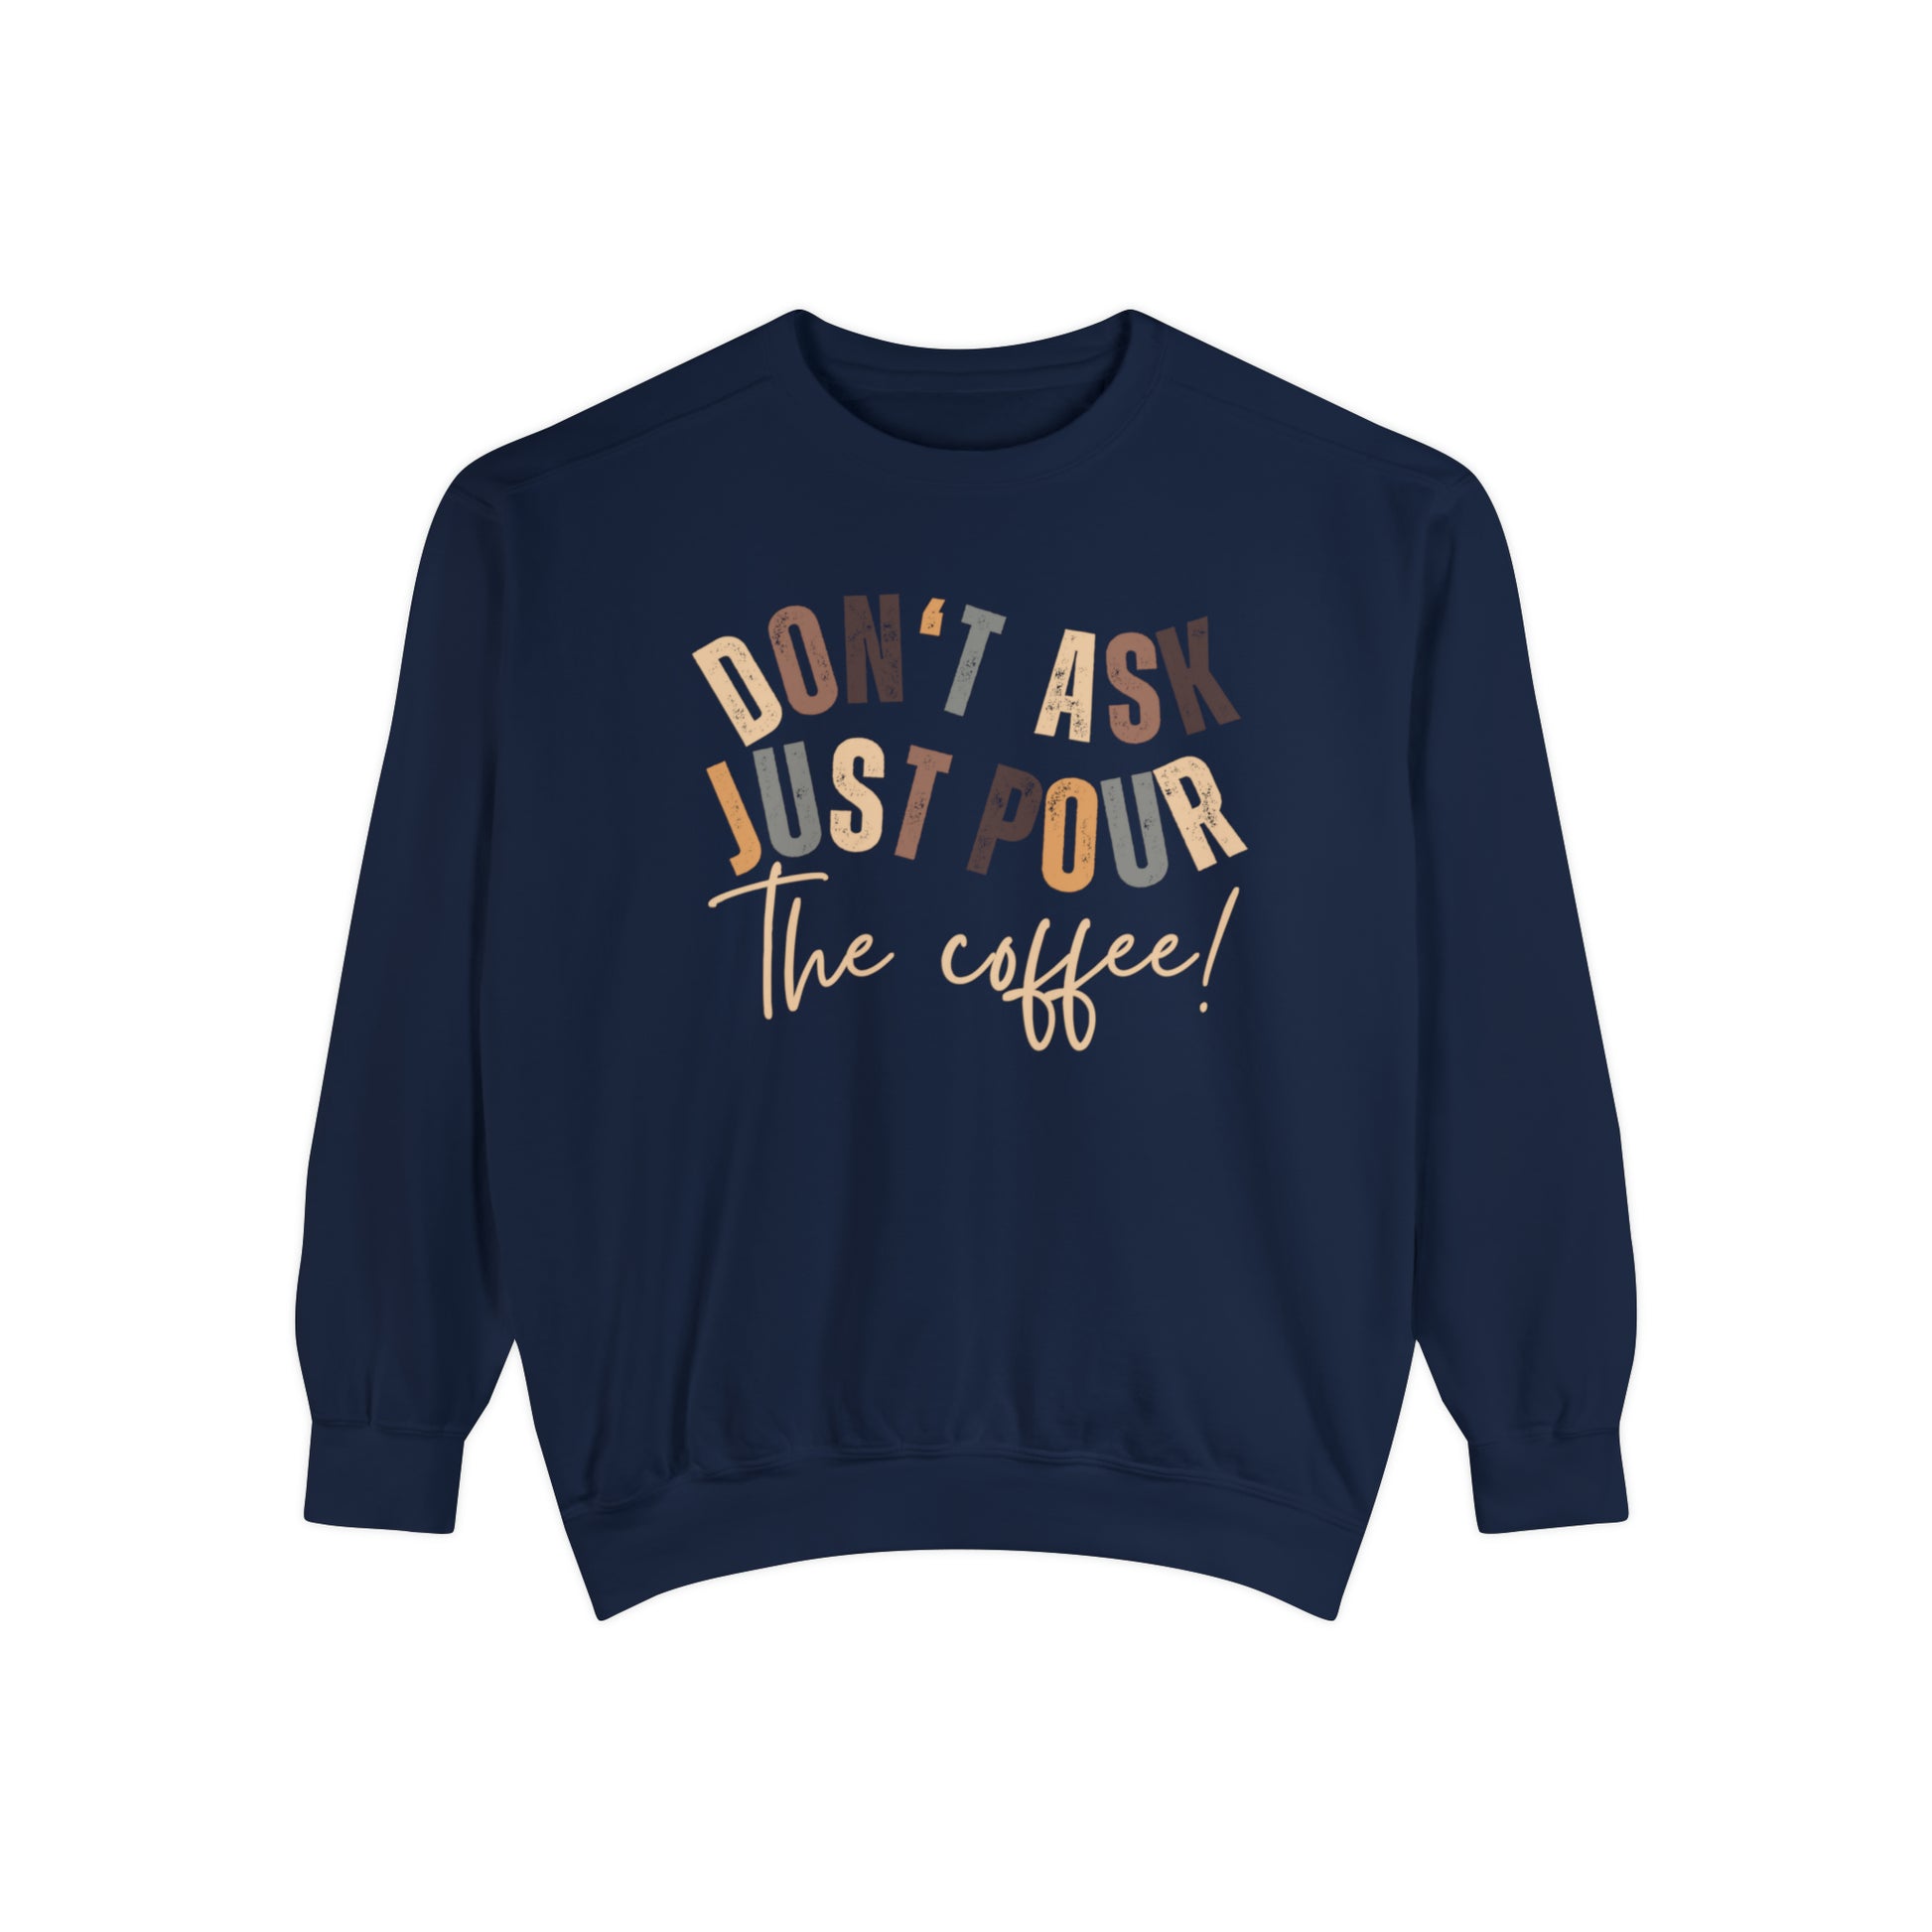 "Cozy Comfort Colors Women's Sweatshirt - 'Don't Ask Just Pour The Coffee!' | Humorous and Trendy Pullover for Coffee Enthusiasts"